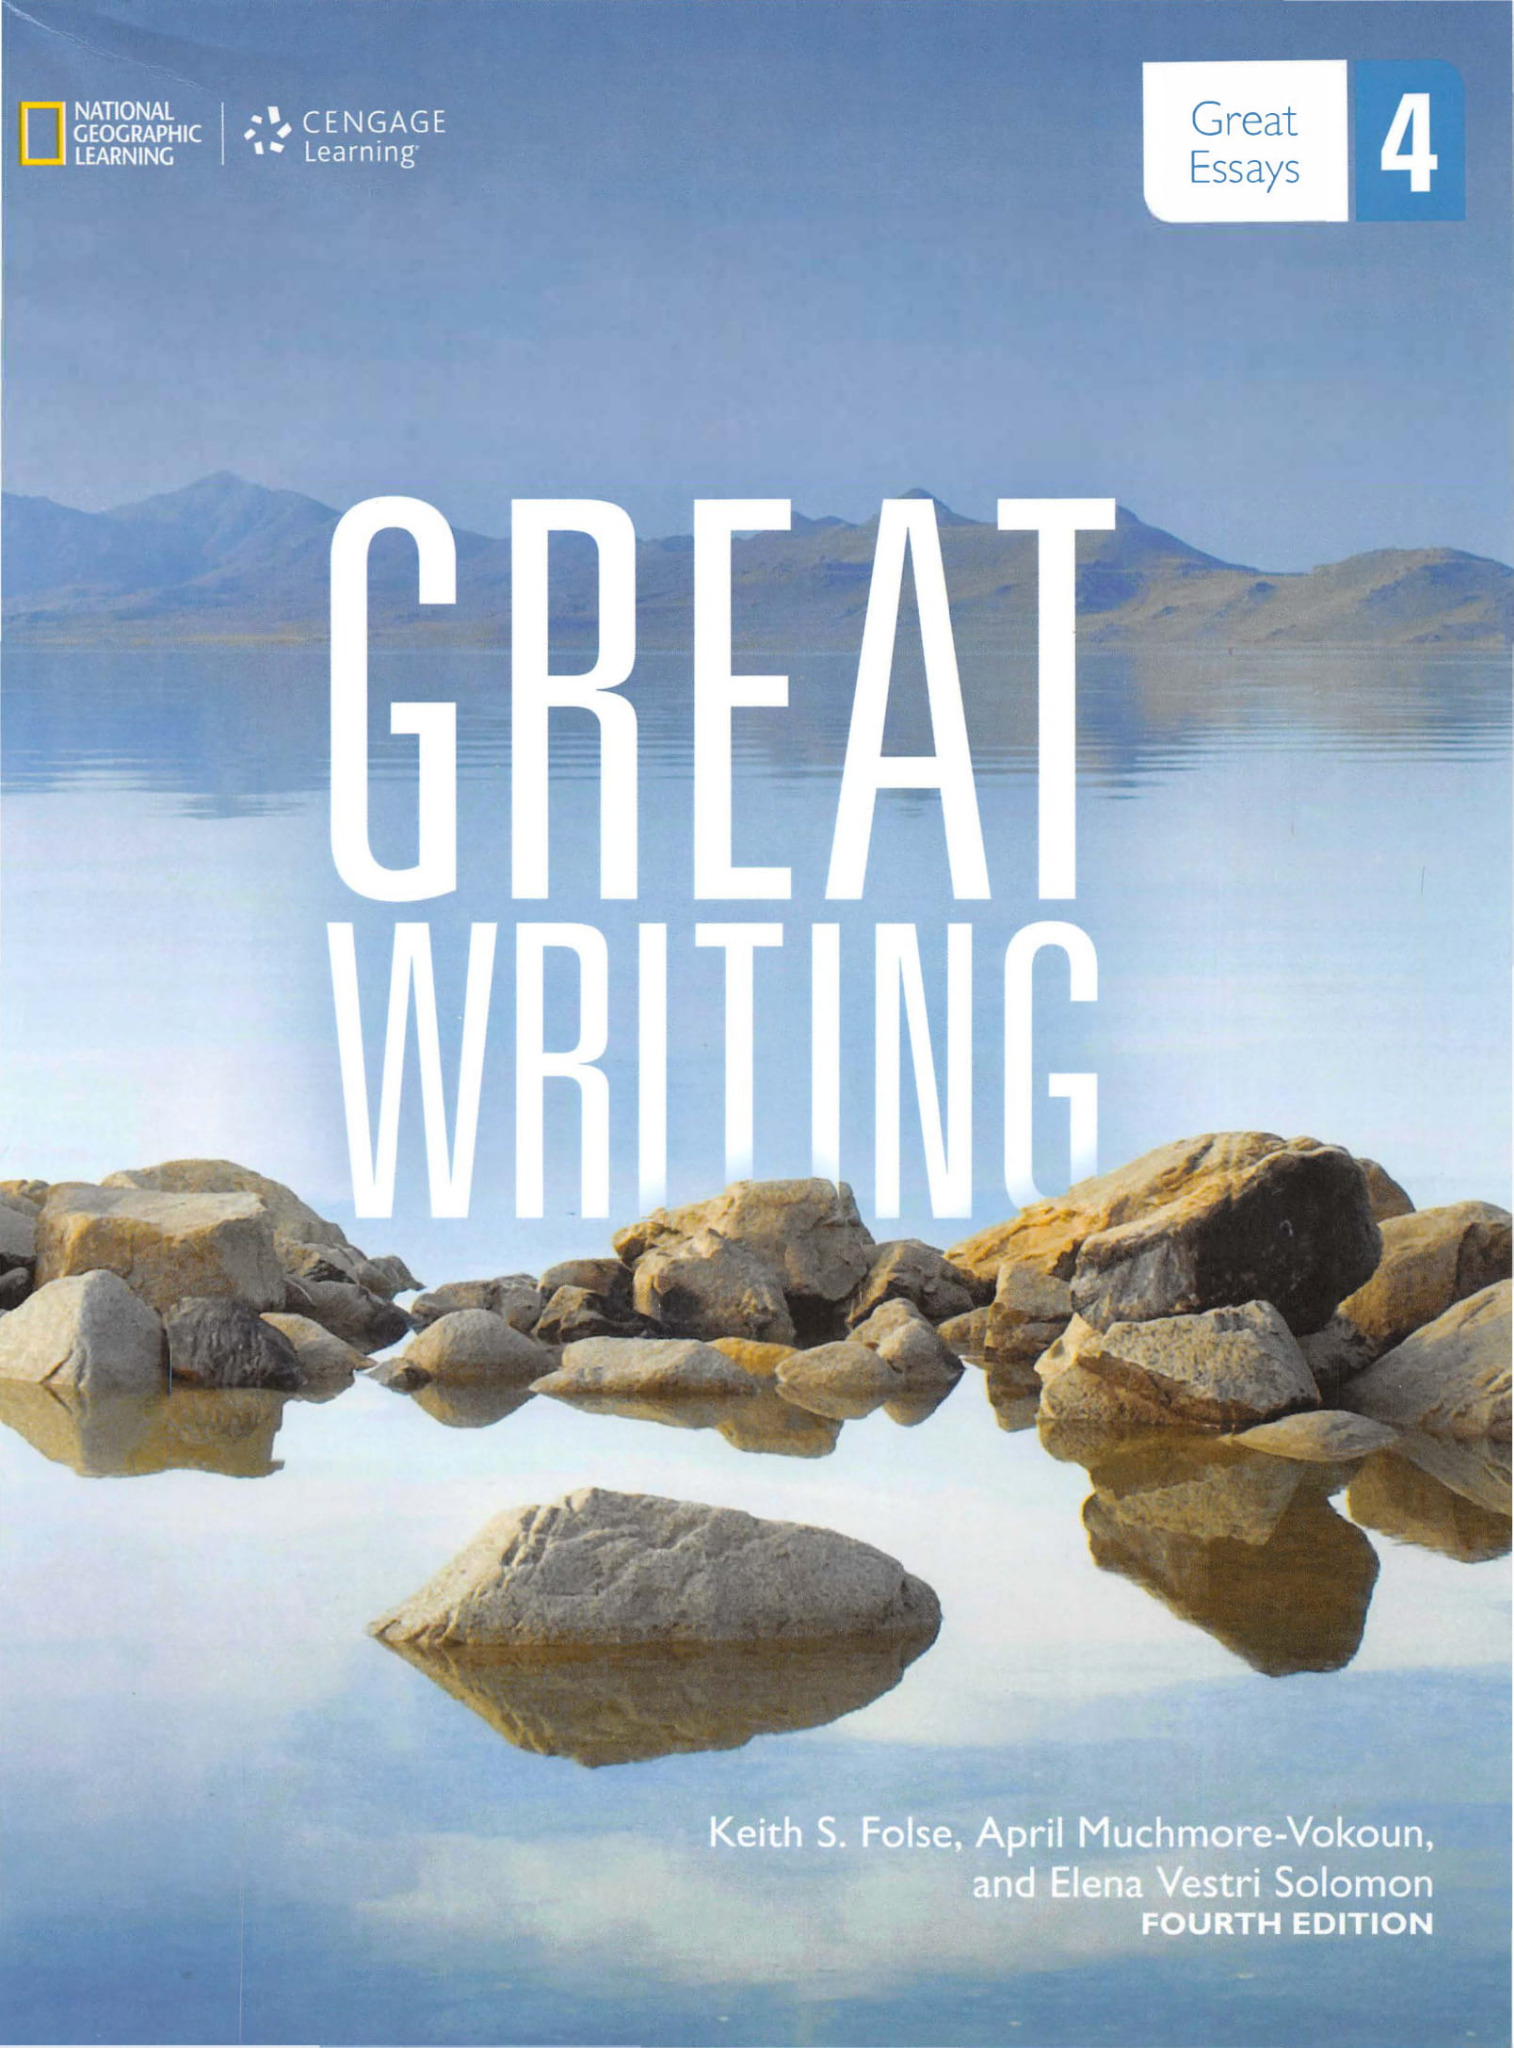 E-books　Writing　Great　Great　–　4:　Essays　Max30